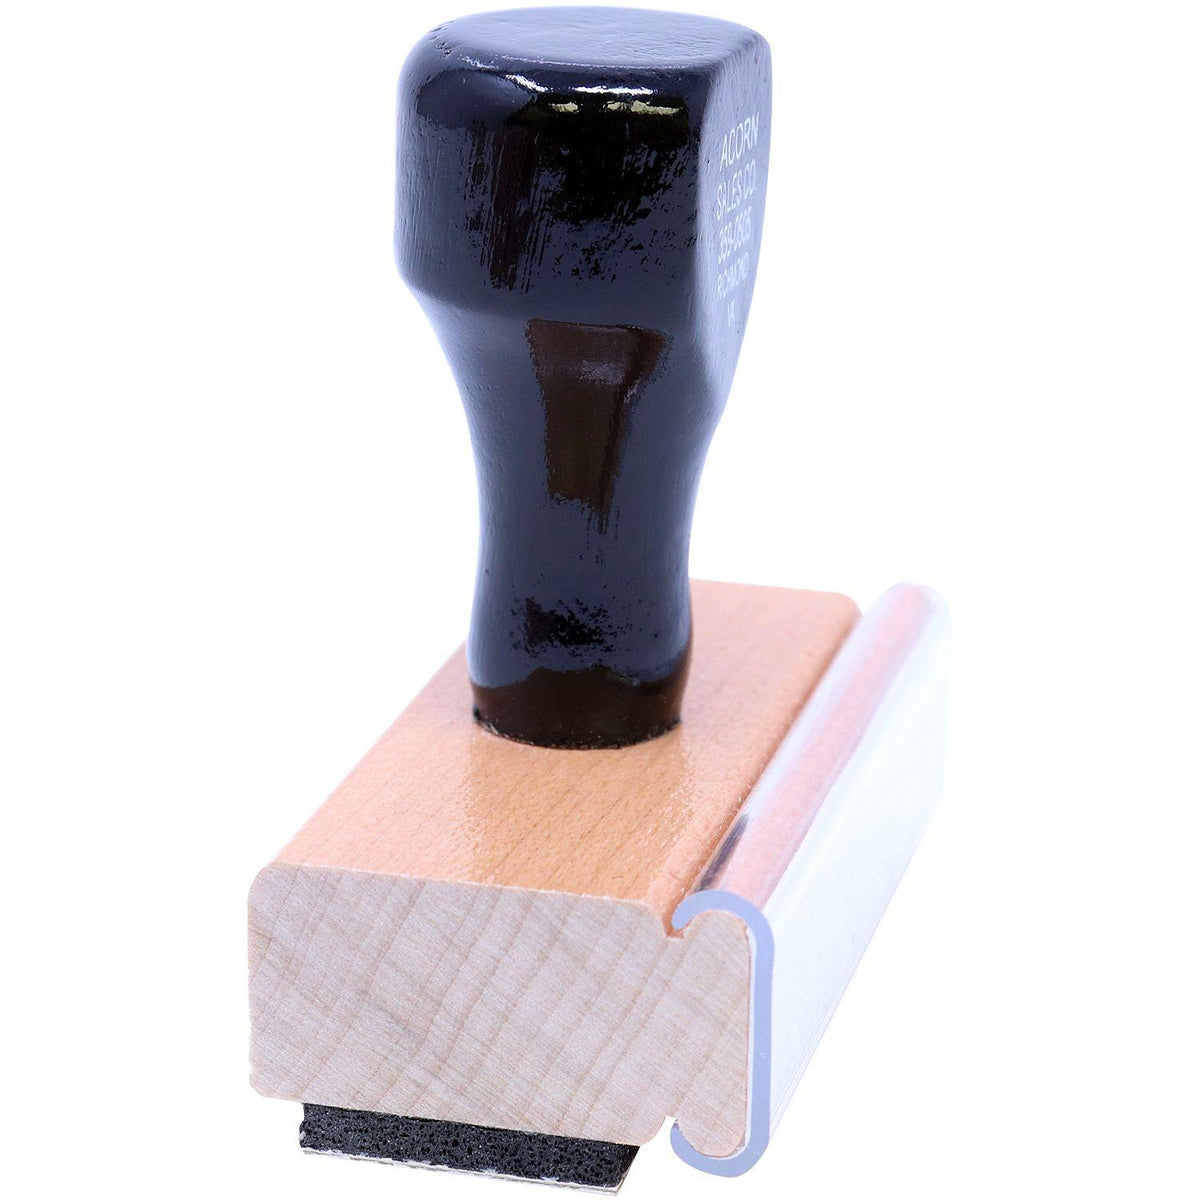 Side View of Bold Physical Due Rubber Stamp at an Angle